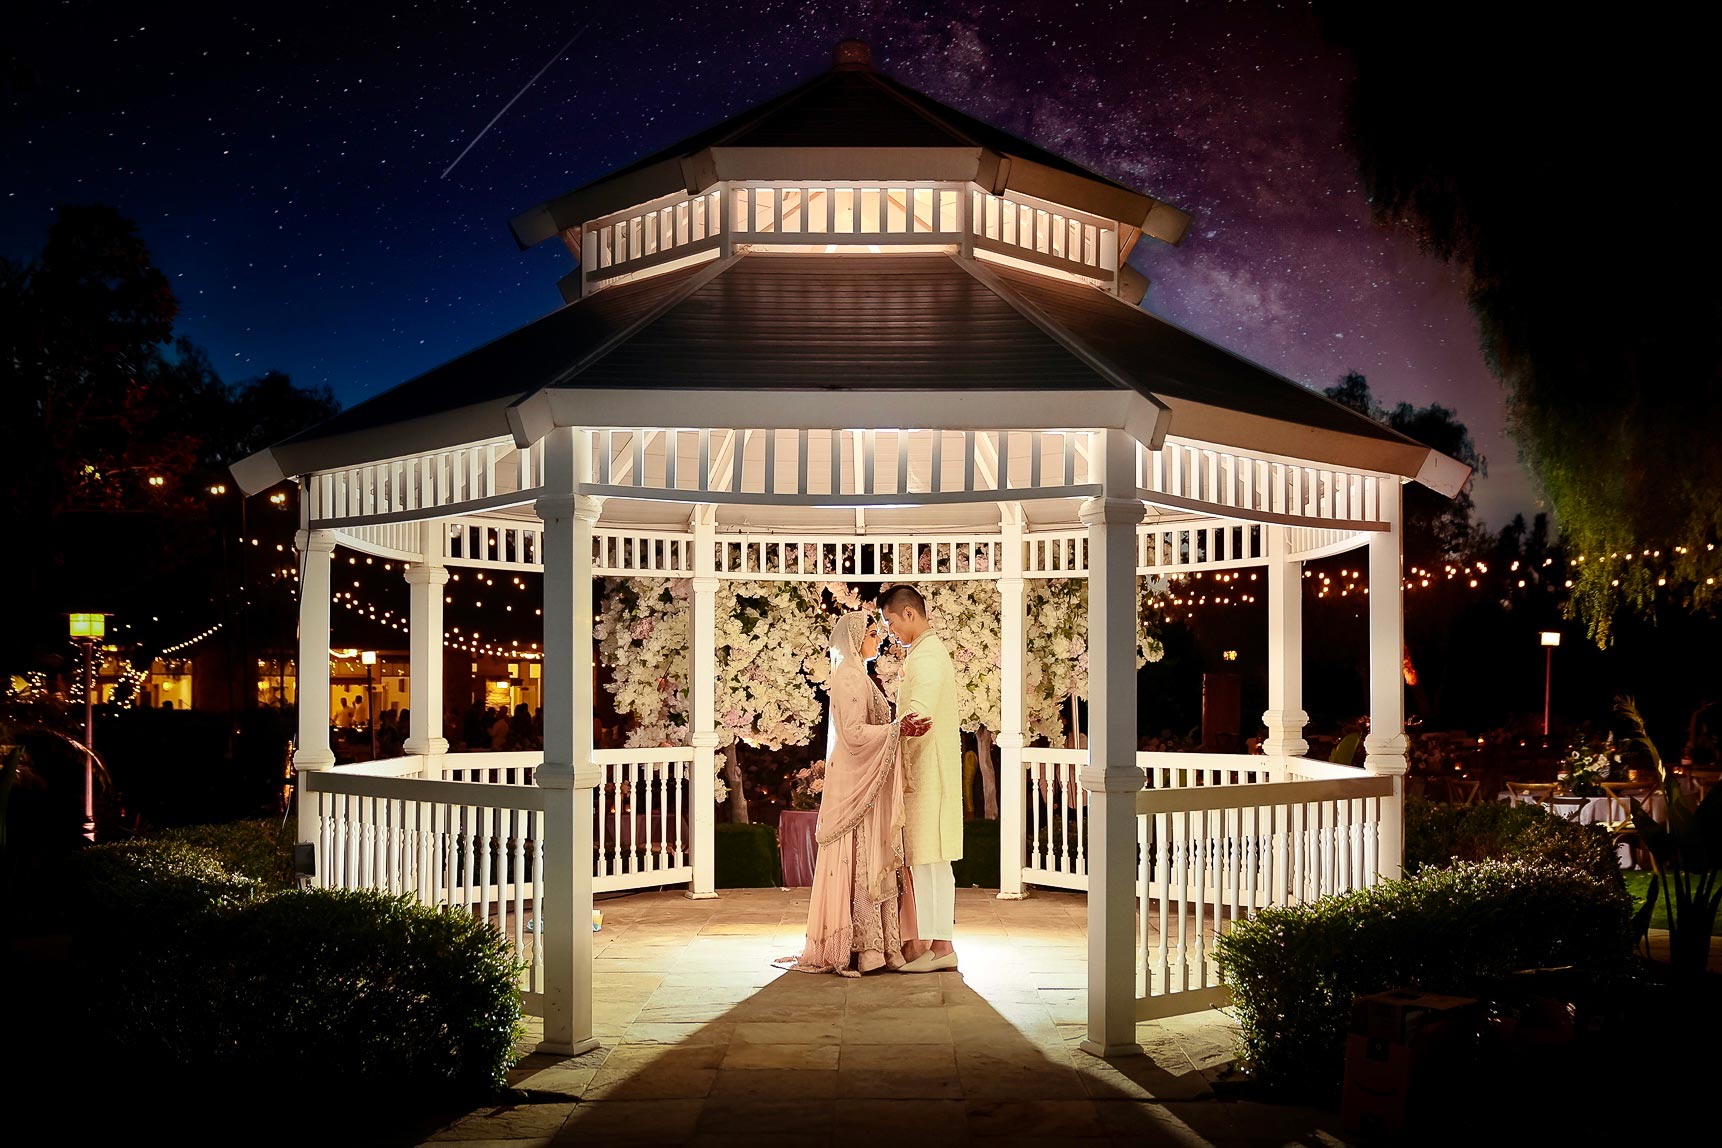 ThomasKim_photography A bride and groom standing under a gazebo at night.